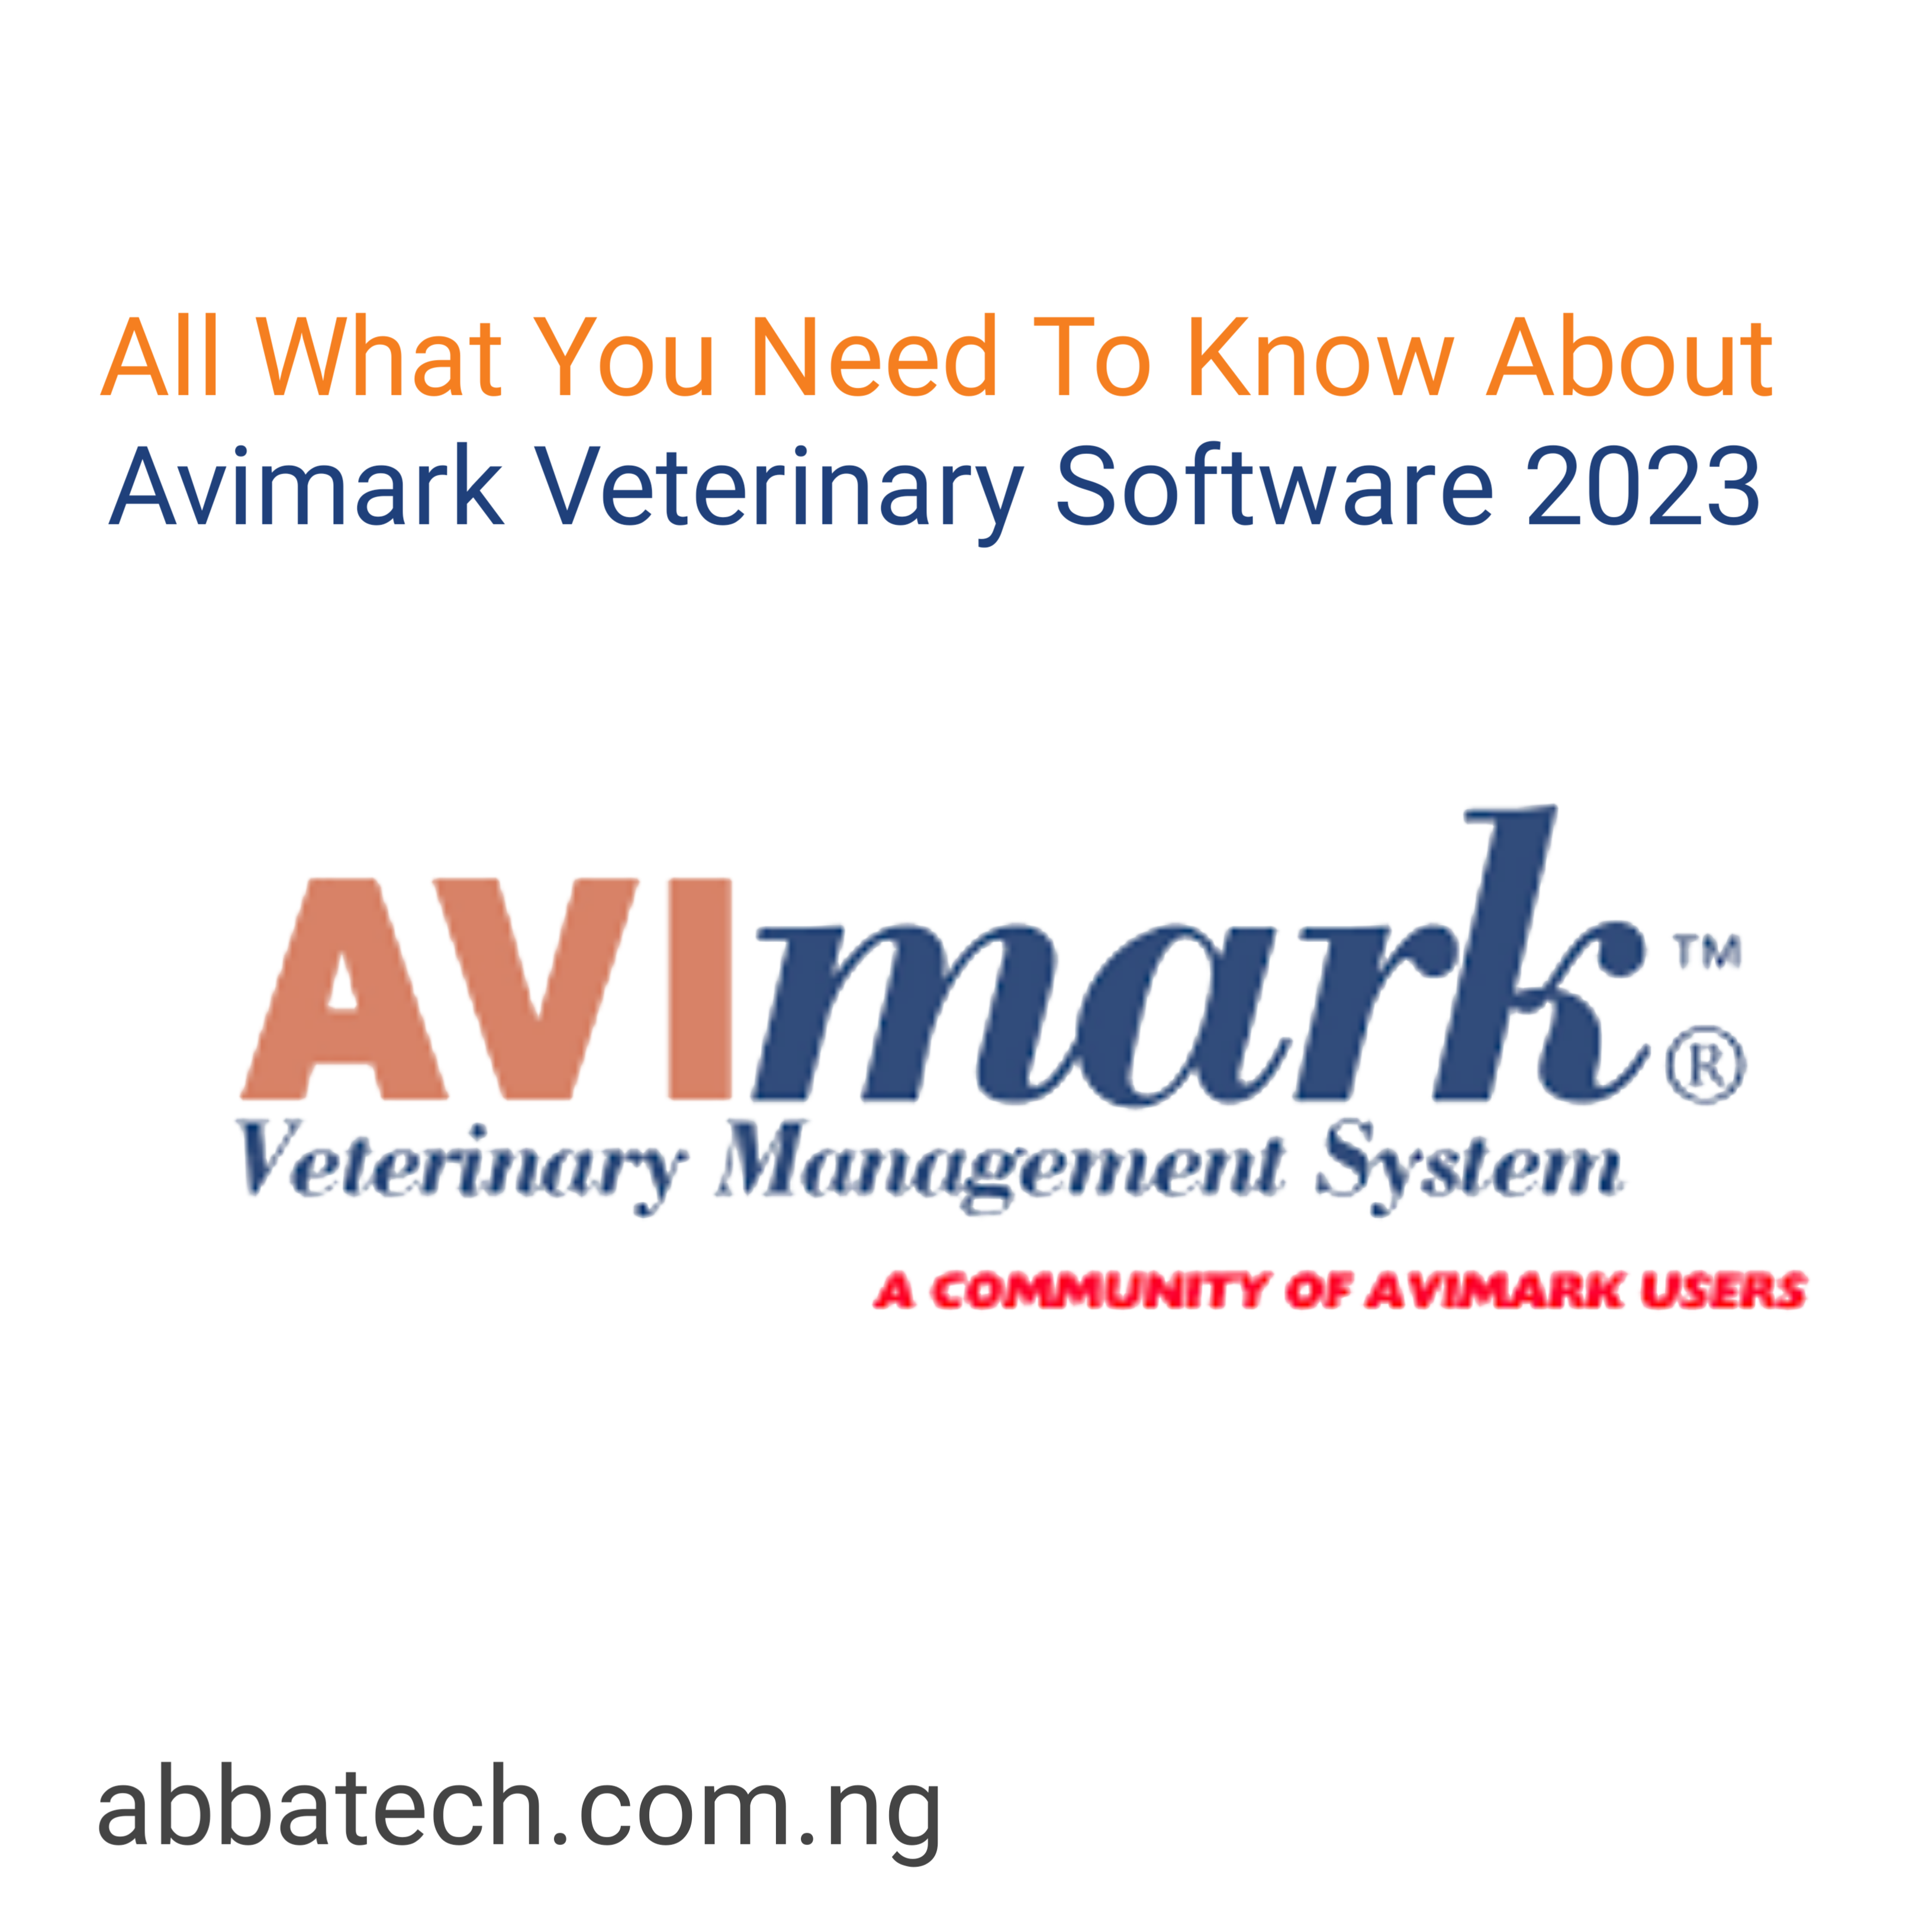 All What You Need Know About Avimark Veterinary Software, Explained In Best Ways 2023